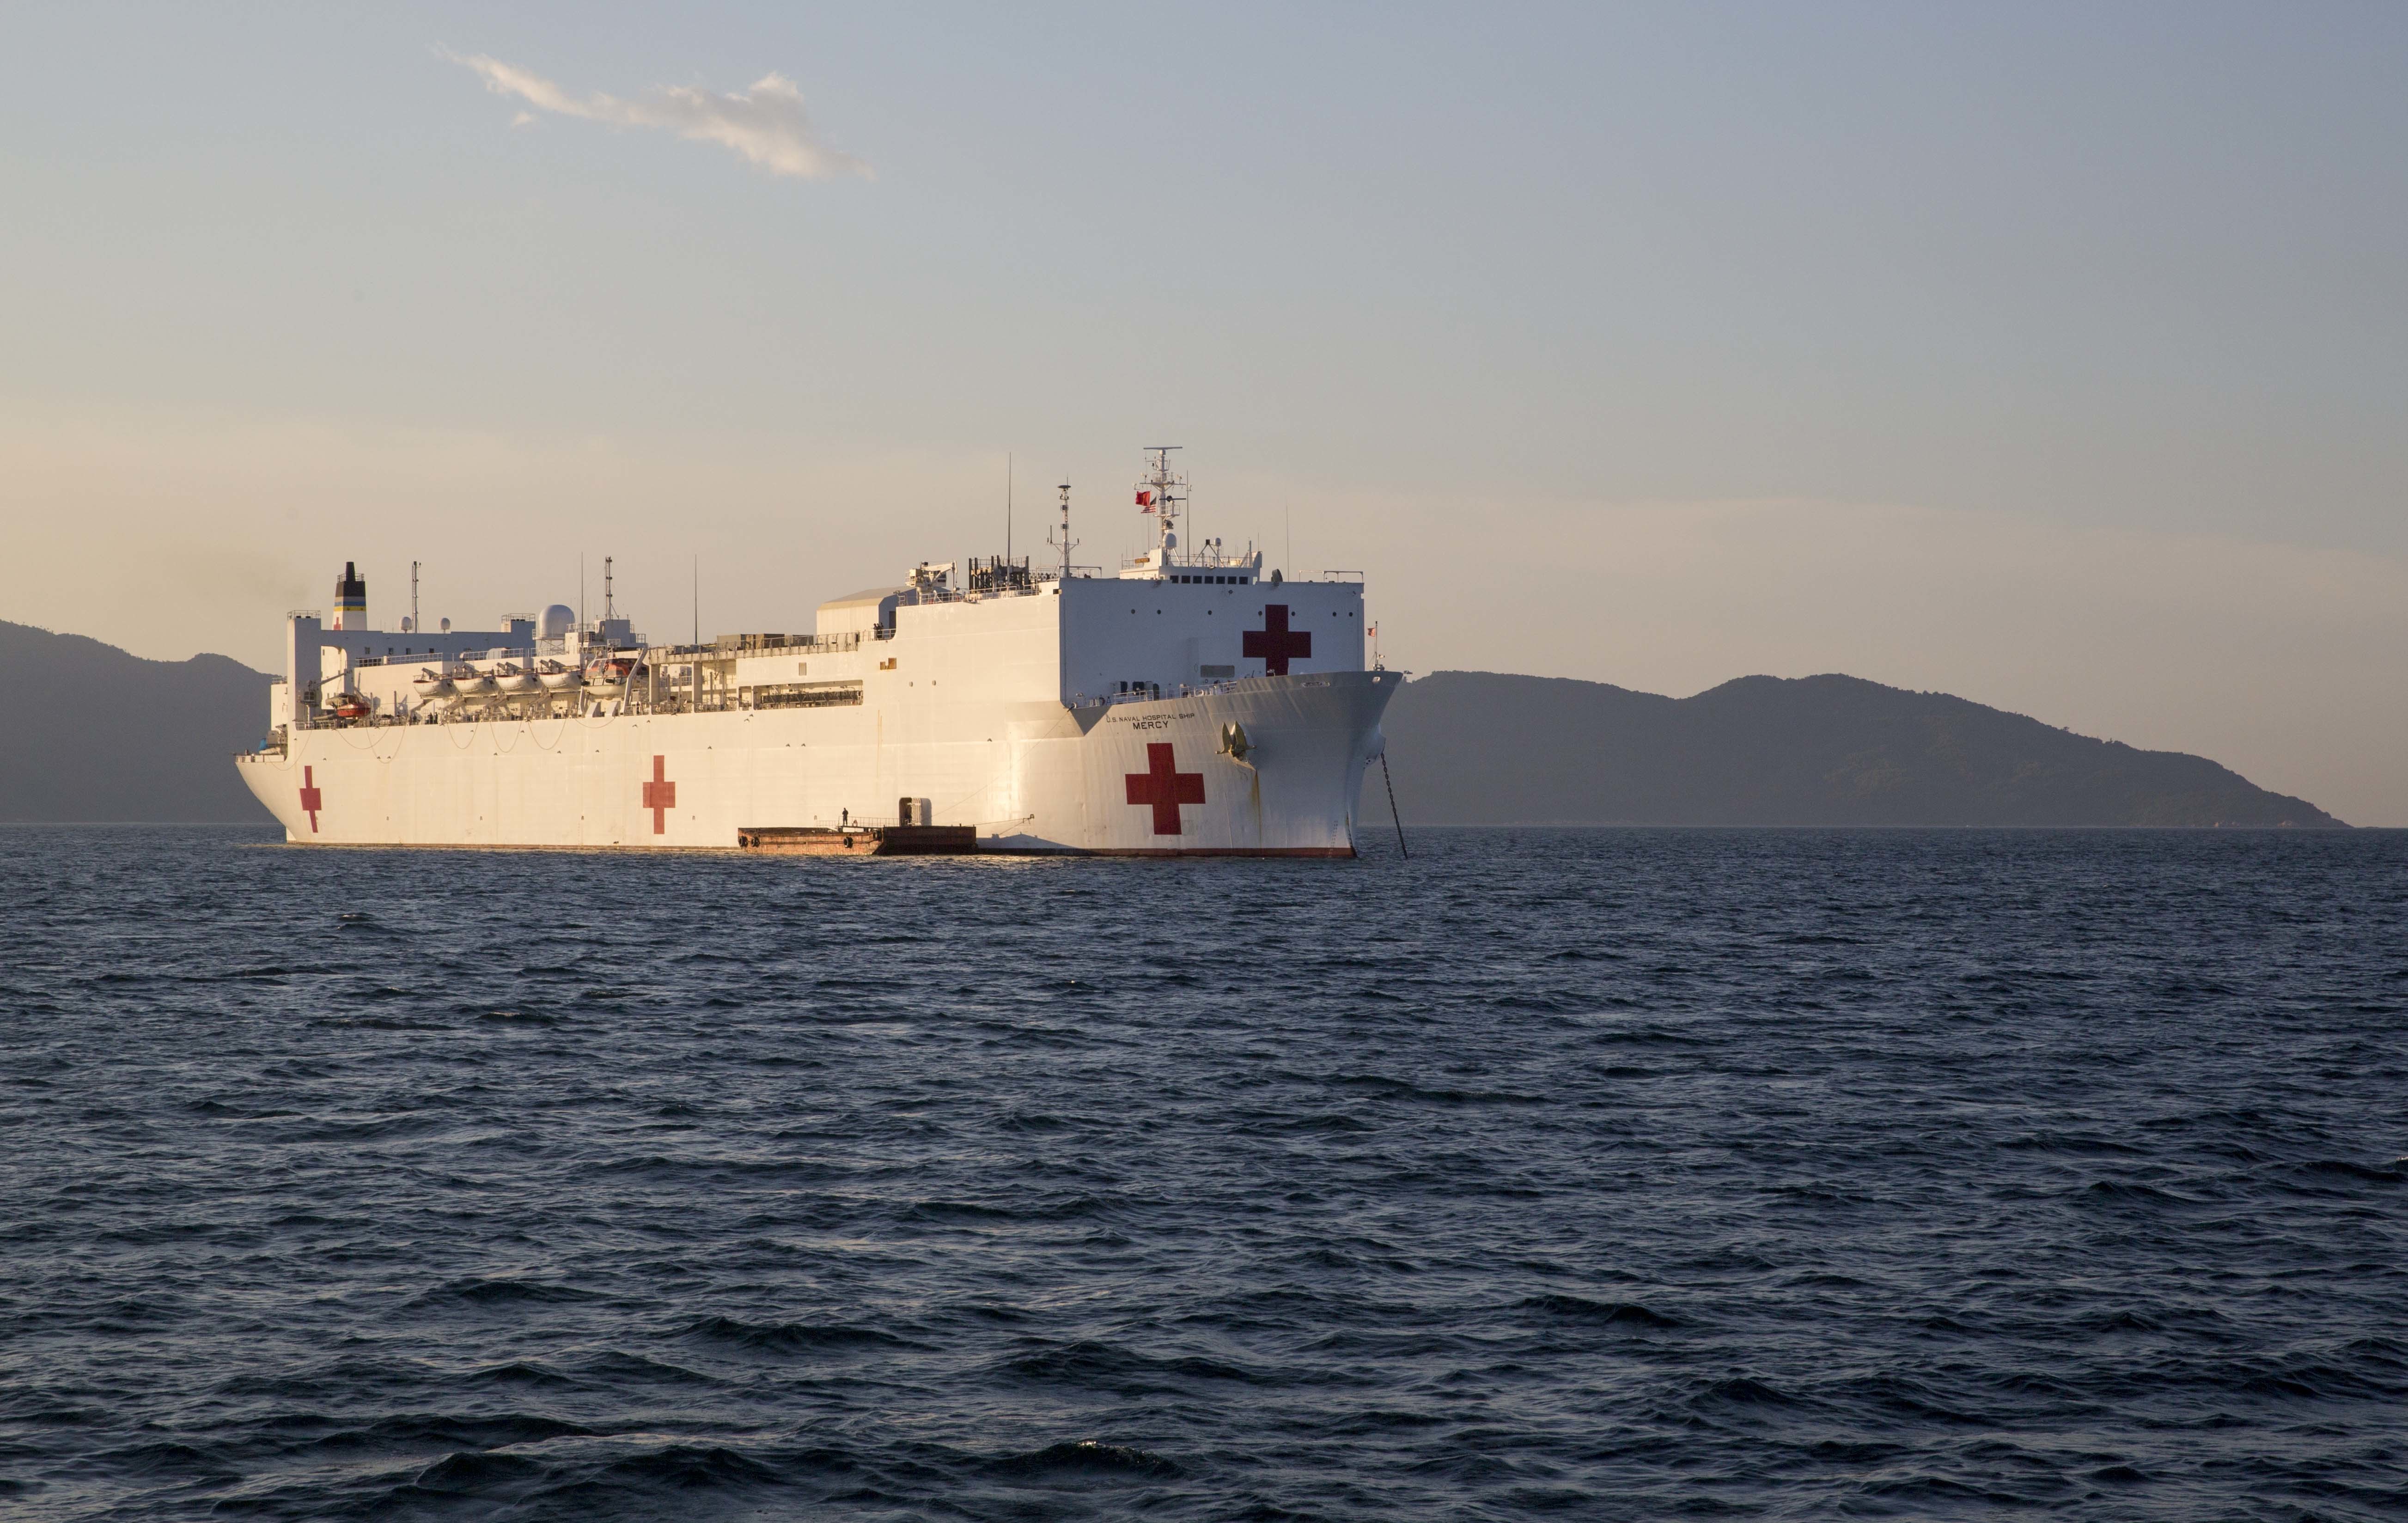 Hospital ship USNS Mercy (T-AH 19) sits at anchor upon its arrival off the coast of Da Nang, Vietnam on Aug. 17, 2015. US Marine Corps Photo